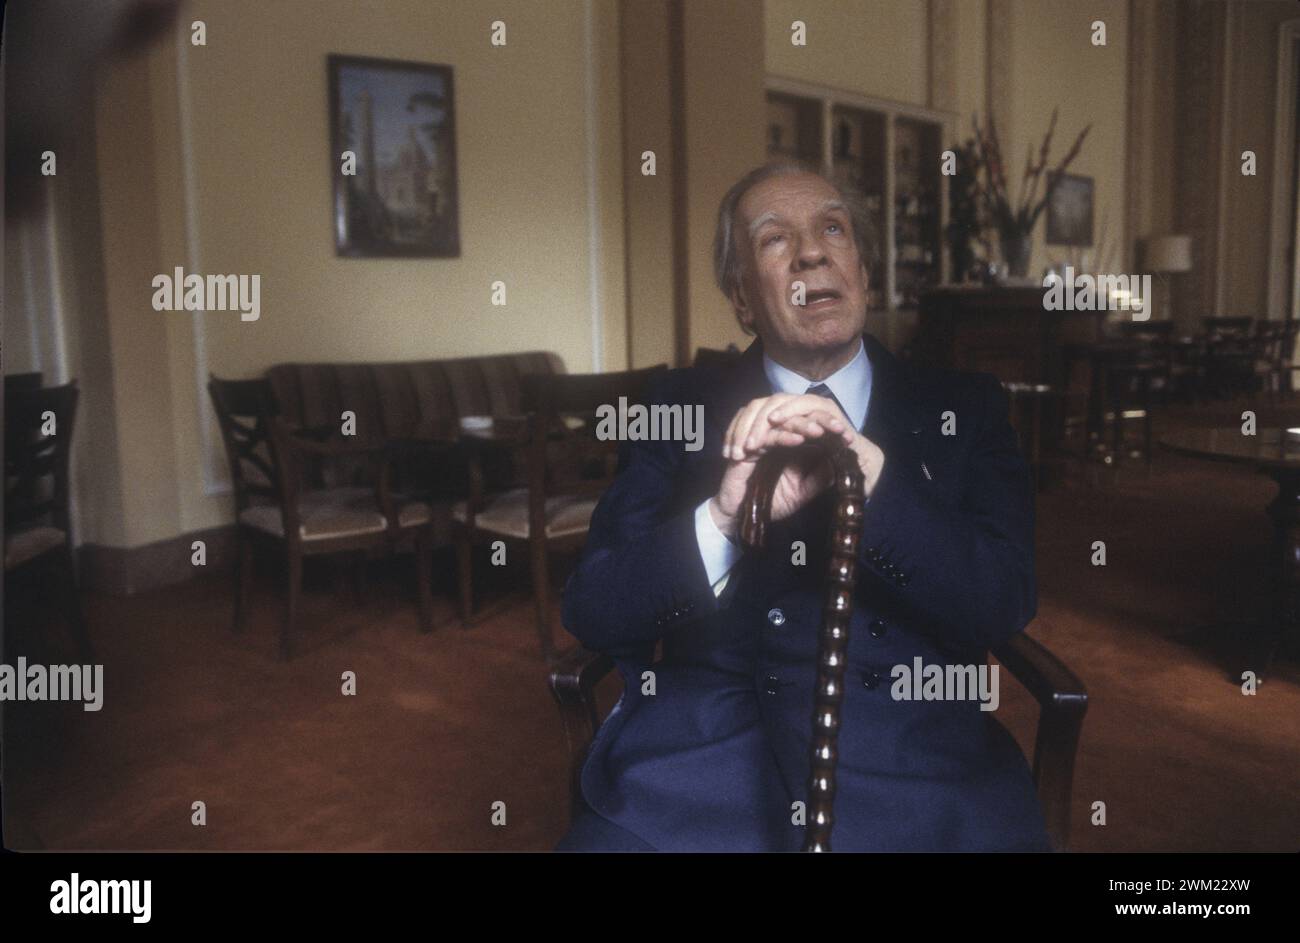 MME4767298 Rome, Westin Excelsior Hotel, 1981. Argentinian writer Jorge Luis Borges/Roma, Hotel Westin Excelsior, 1981. The scrittore Argentino Jorge Luis Borges -; (add.info.: Rome, Westin Excelsior Hotel, 1981. Argentinian writer Jorge Luis Borges/Roma, Hotel Westin Excelsior, 1981. The scrittore Argentino Jorge Luis Borges -); © Marcello Mencarini. All rights reserved 2024. Stock Photo